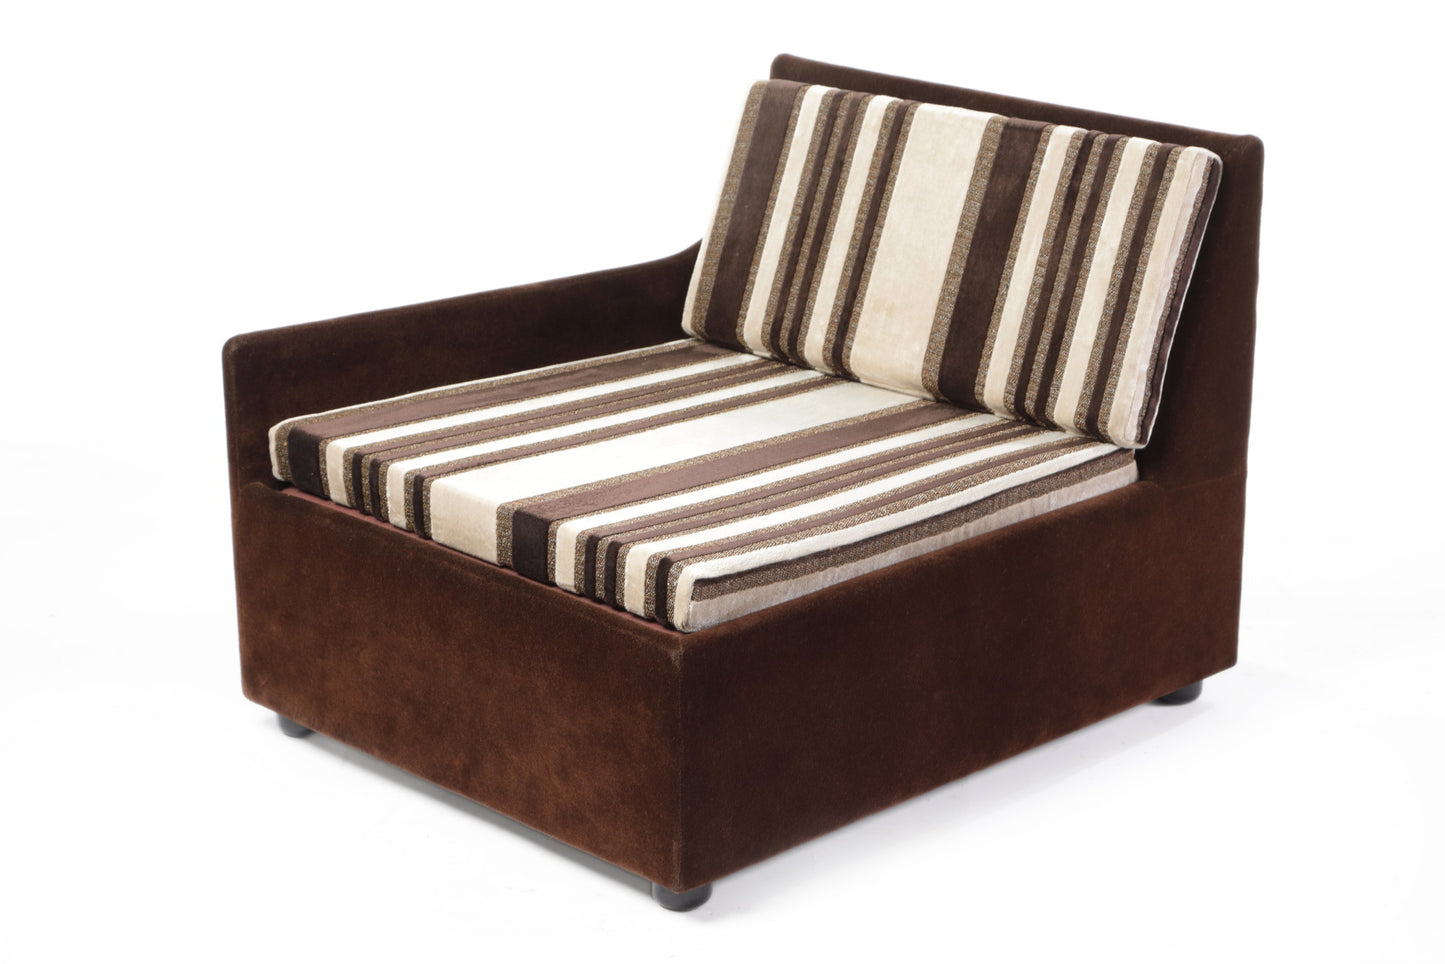 Ivory and brown modular sofa from the 70s